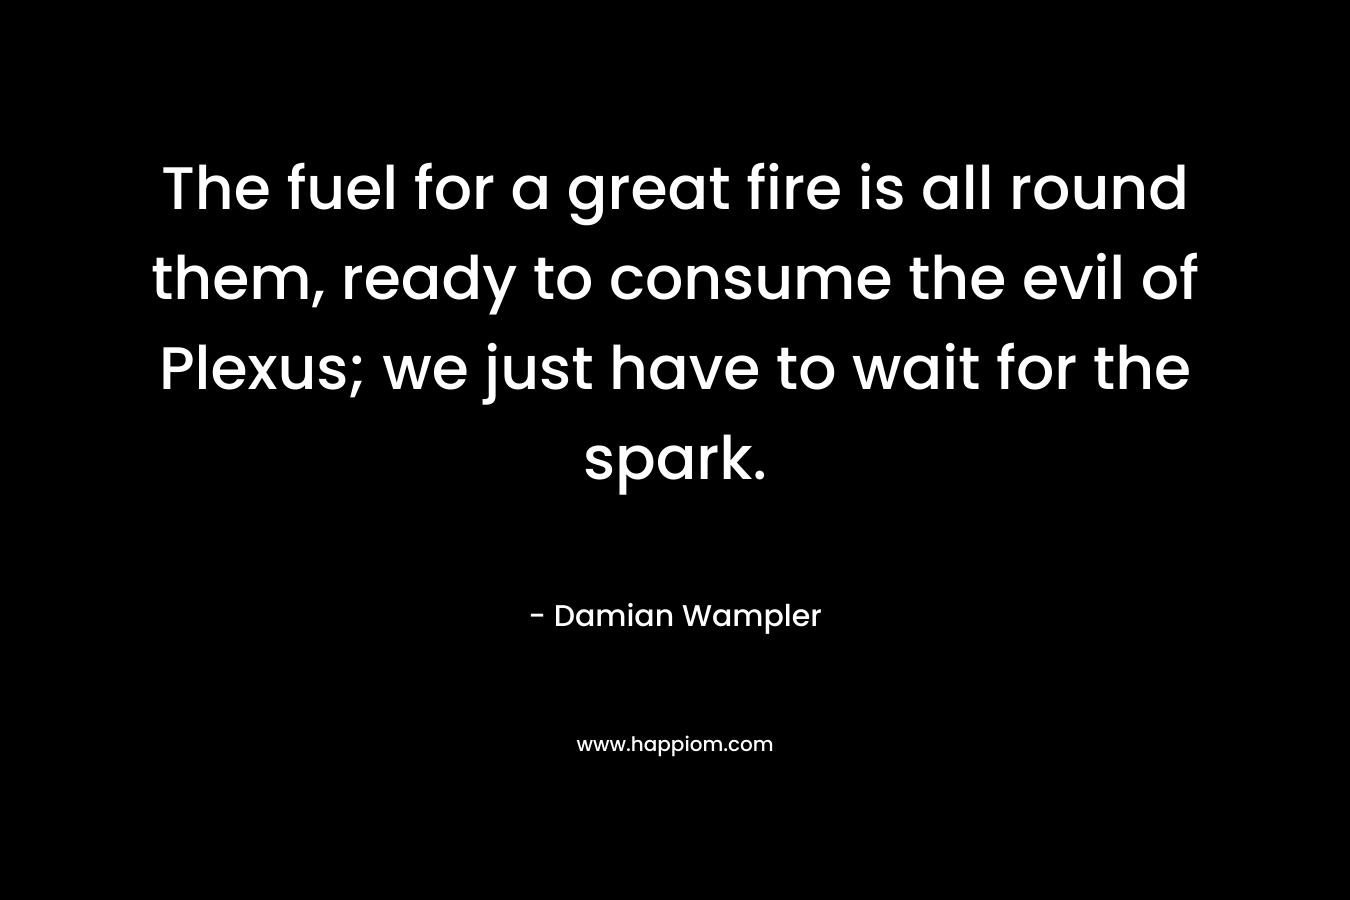 The fuel for a great fire is all round them, ready to consume the evil of Plexus; we just have to wait for the spark. – Damian Wampler